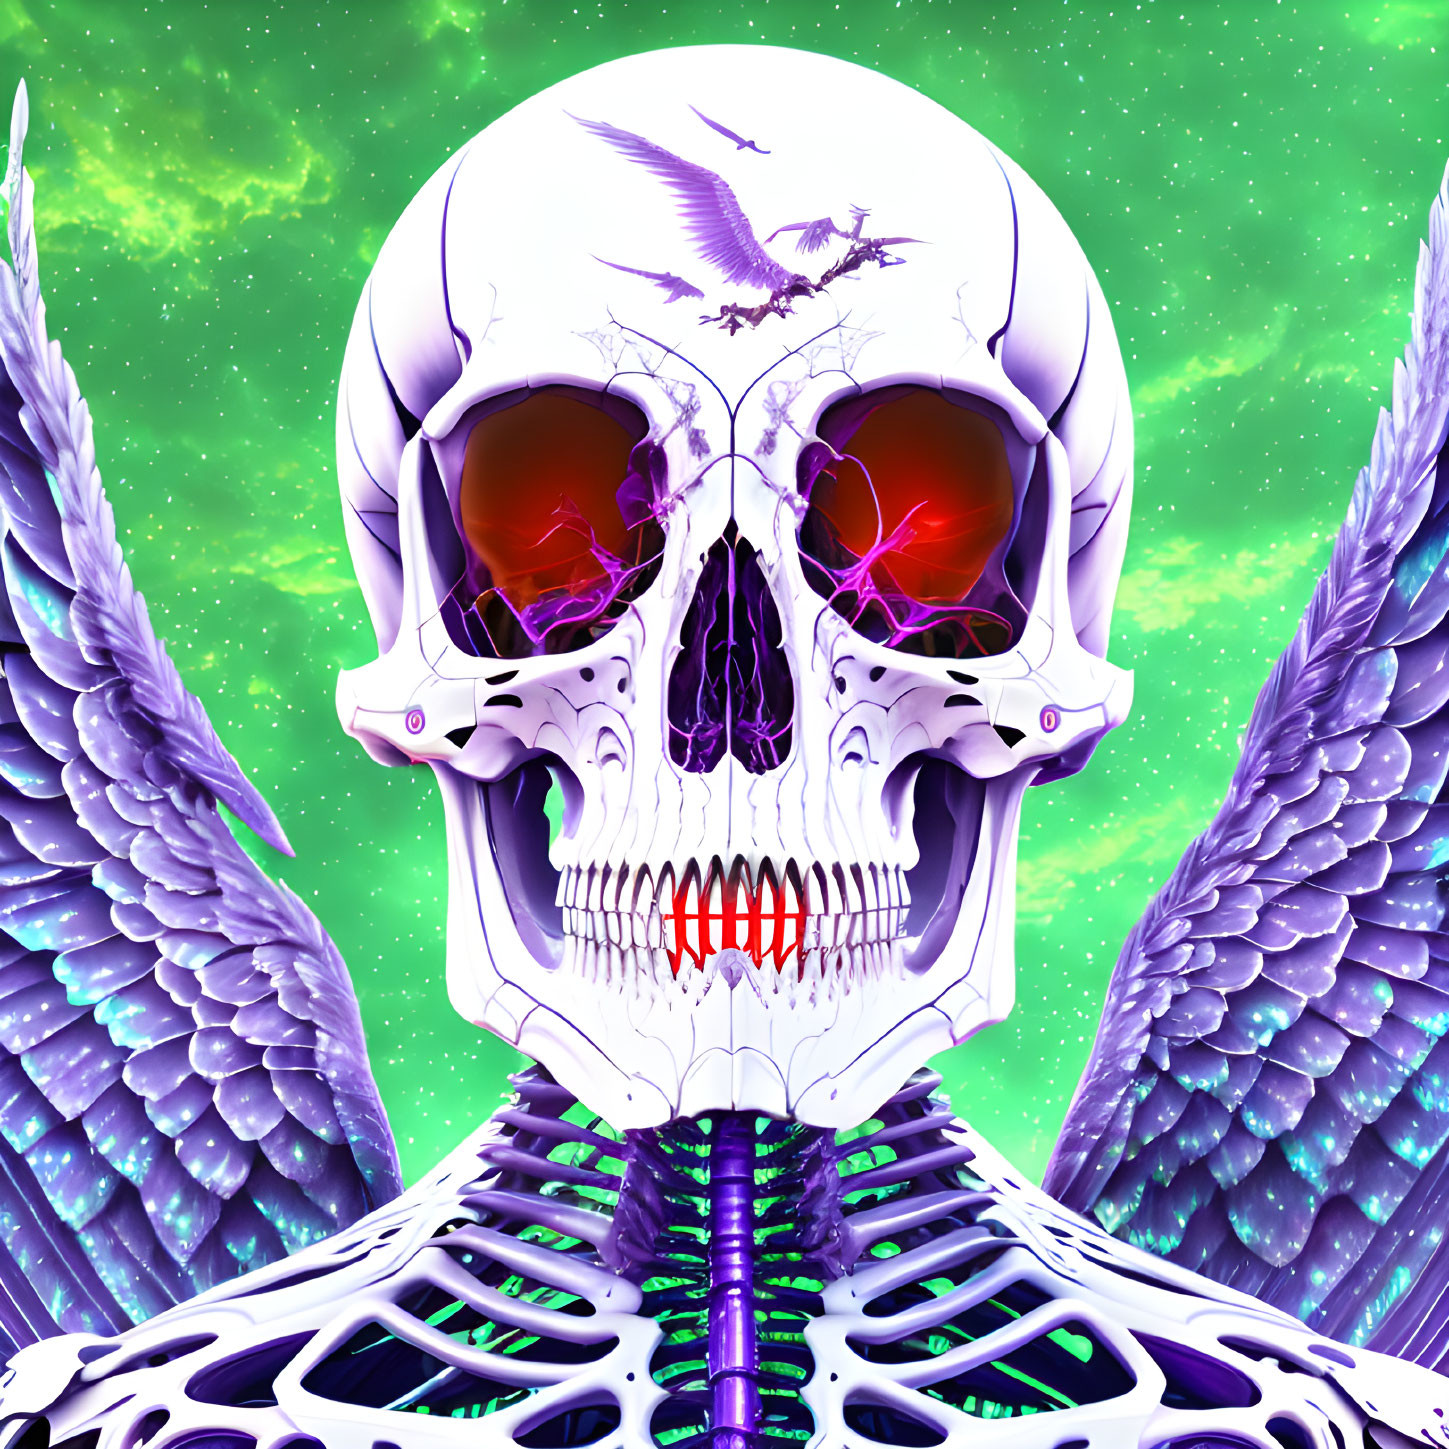 Surreal skull with glowing red eyes and wings in starry green sky